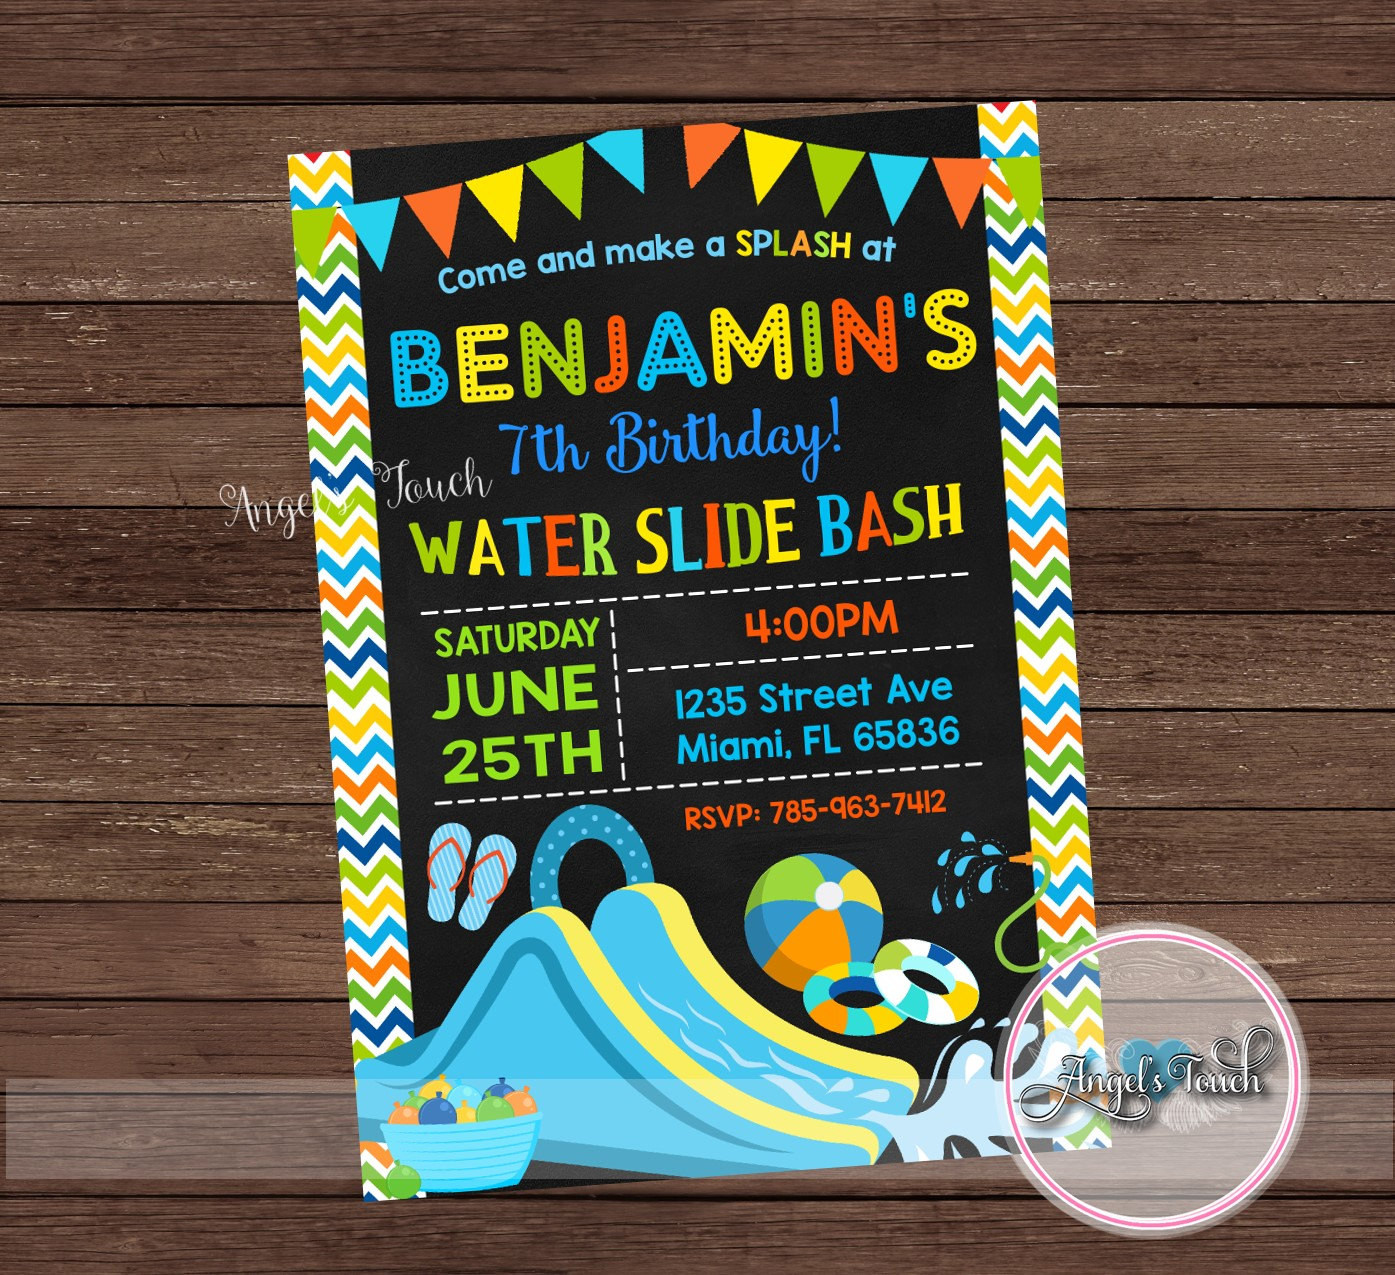 Water Slide Birthday Party Invitations
 Water Slide Party Invitation Waterslide Birthday Invitation